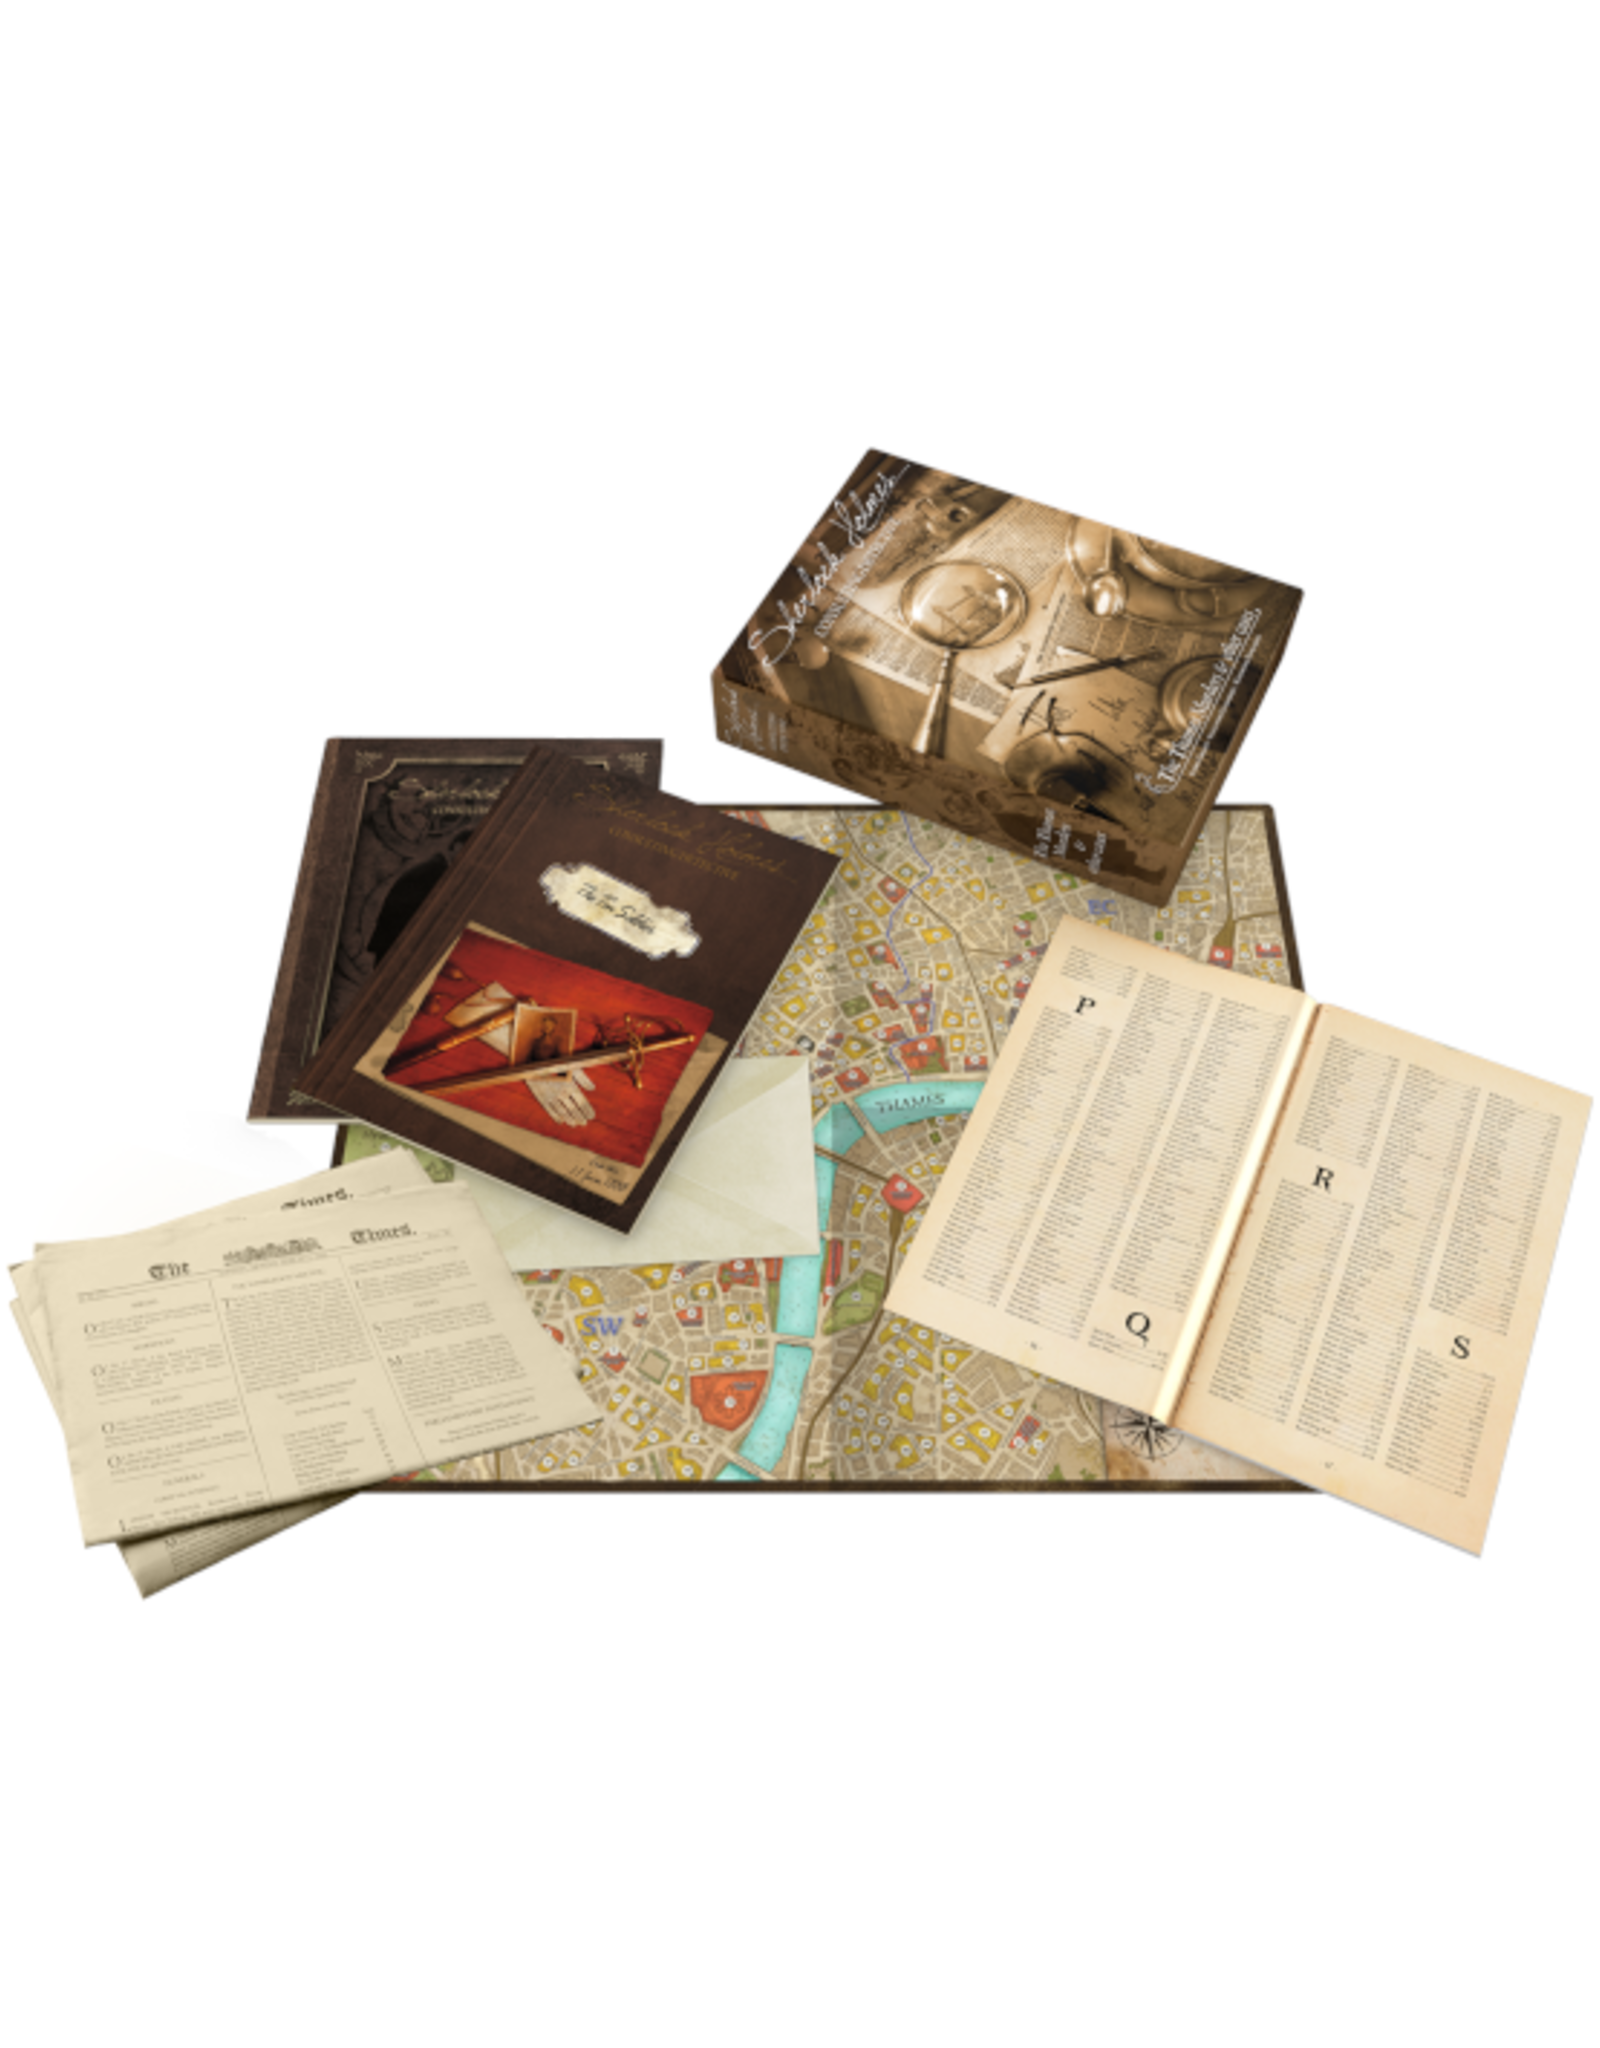 Space Cowboys Space Cowboys - Sherlock Holmes Consulting Detective - The Thames Murders and Other Cases